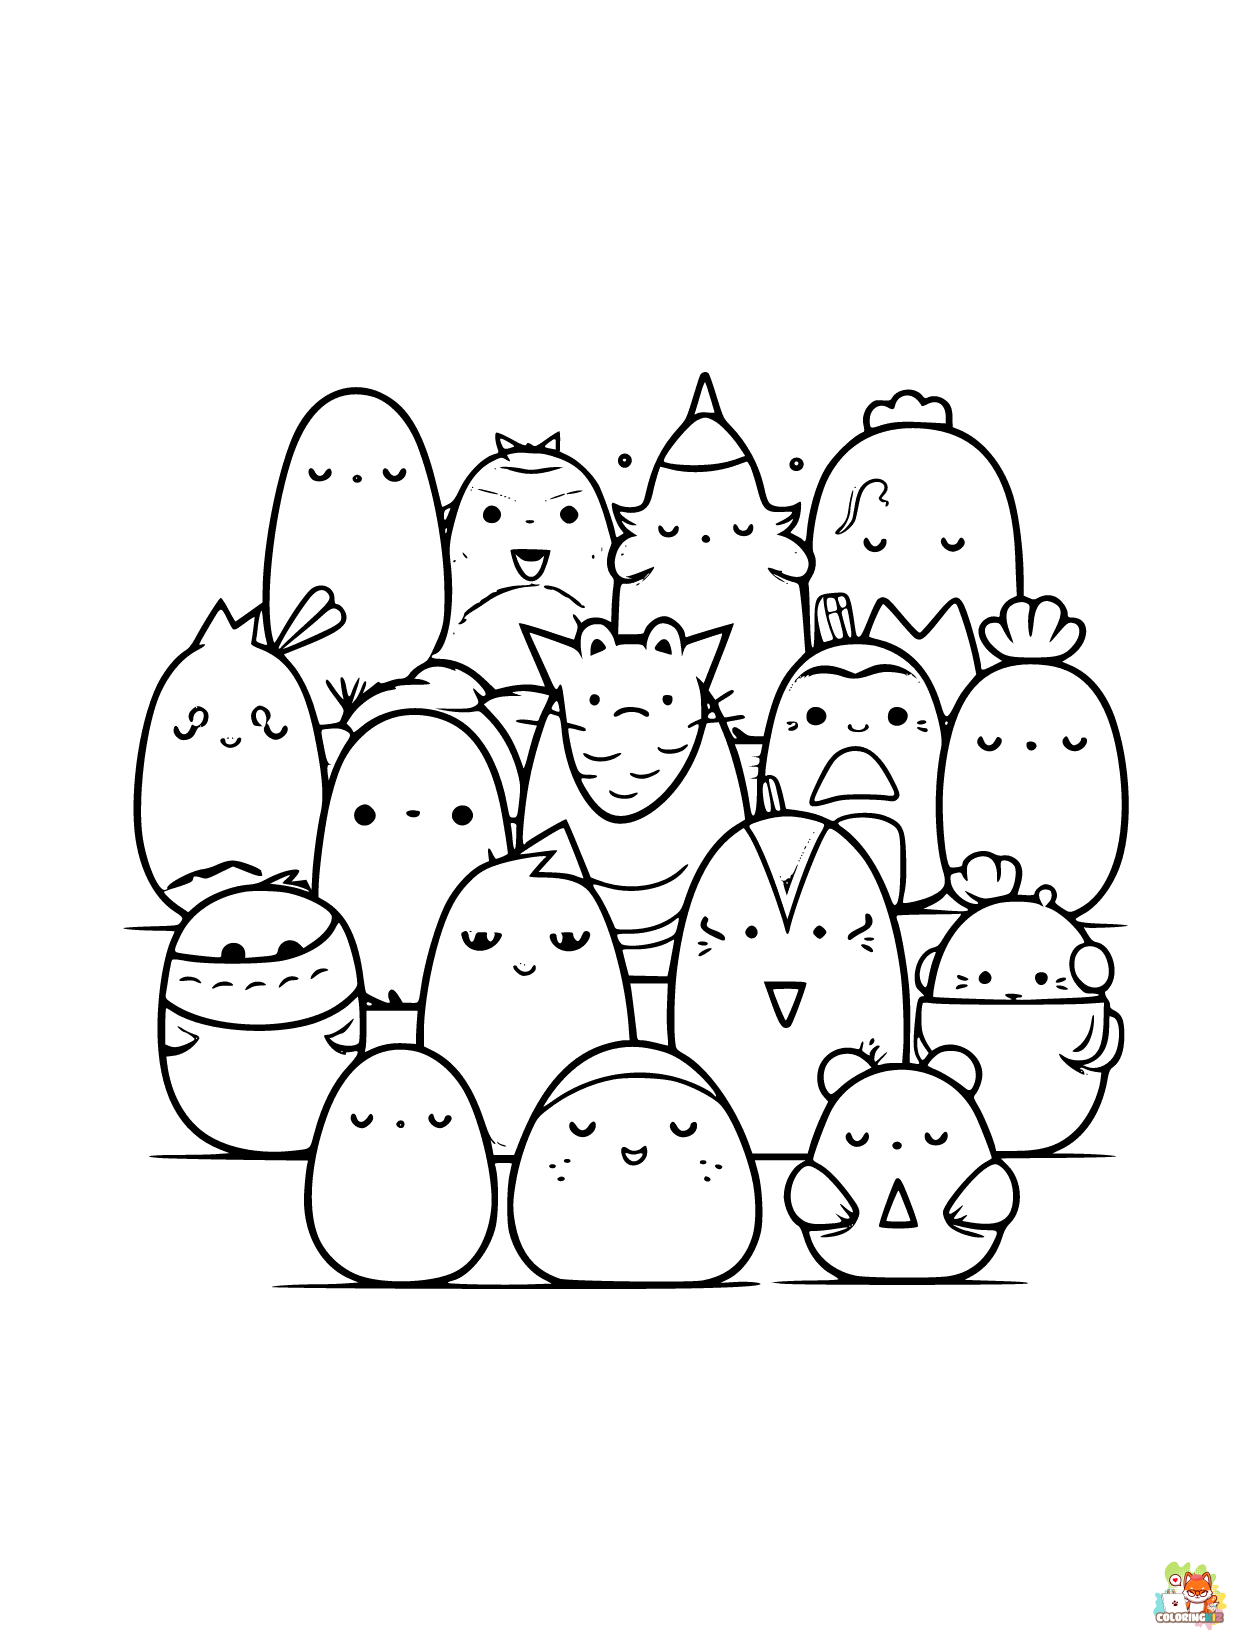 Squishmallows coloring pages free 2